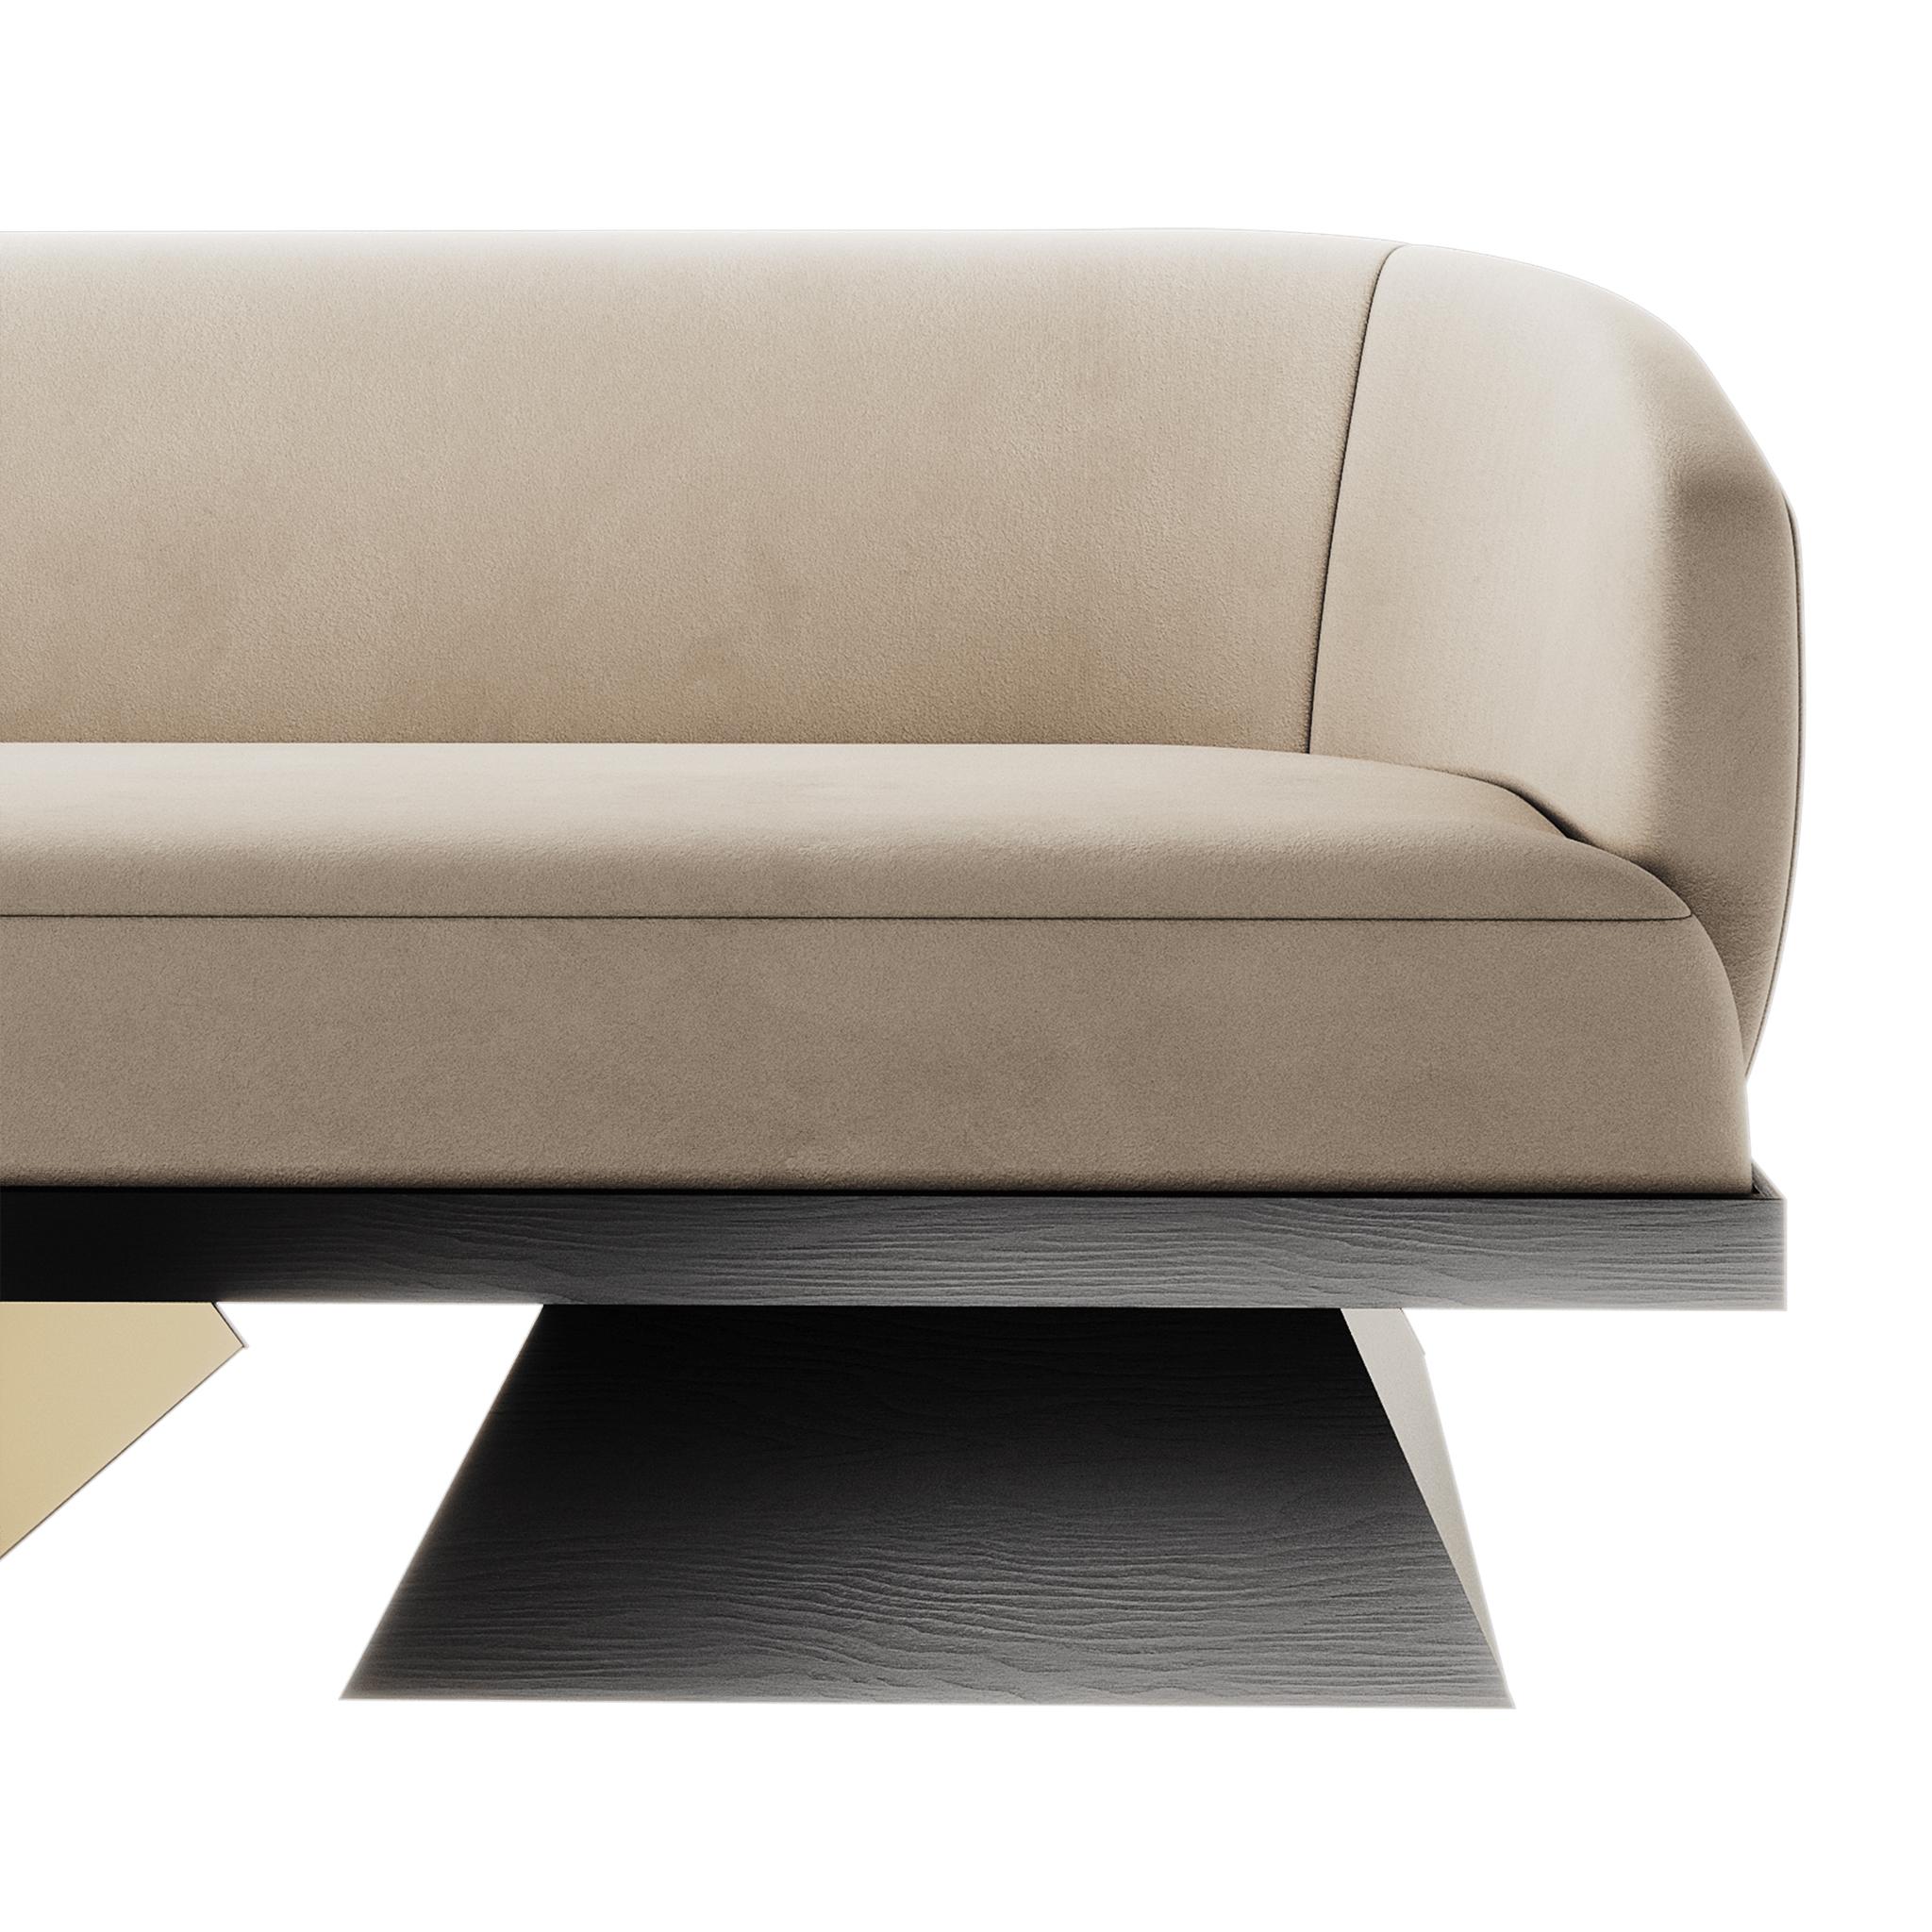 Polished Modern Luxury in Suede with Base in Matte Wengue Ash Wood, Details in Brass For Sale